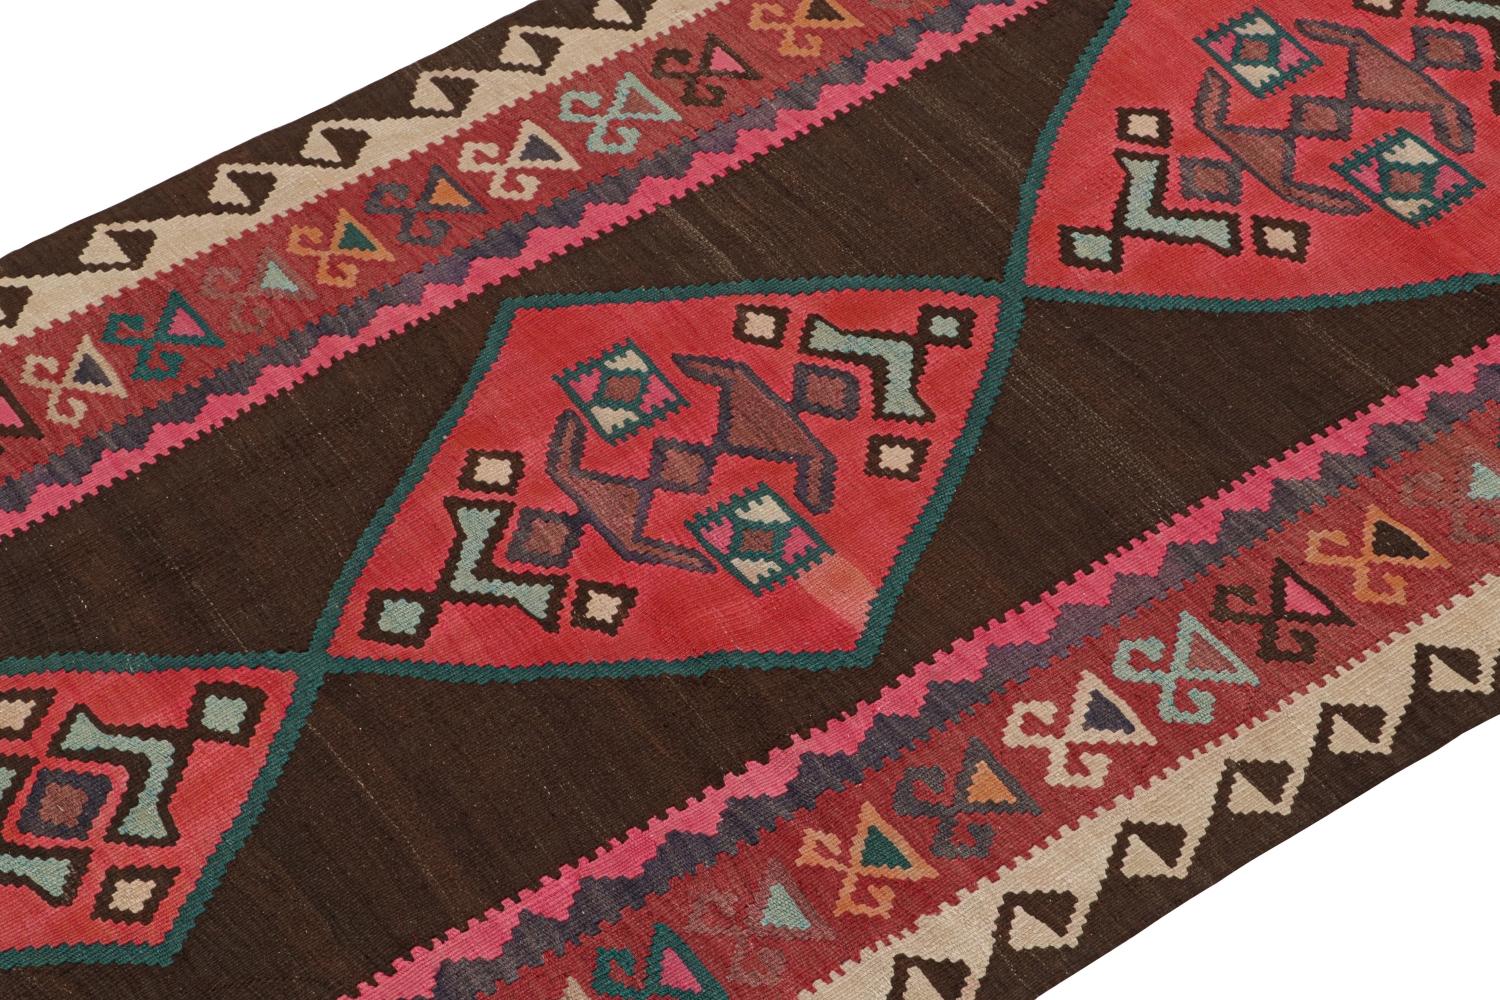 This vintage 4x9 Persian Kilim is a tribal rug from Meshkin—a small northwestern village known for its fabulous works. Handwoven in wool, it originates circa 1950-1960.

On the Design:

The classic design enjoys red medallions on a rich brown